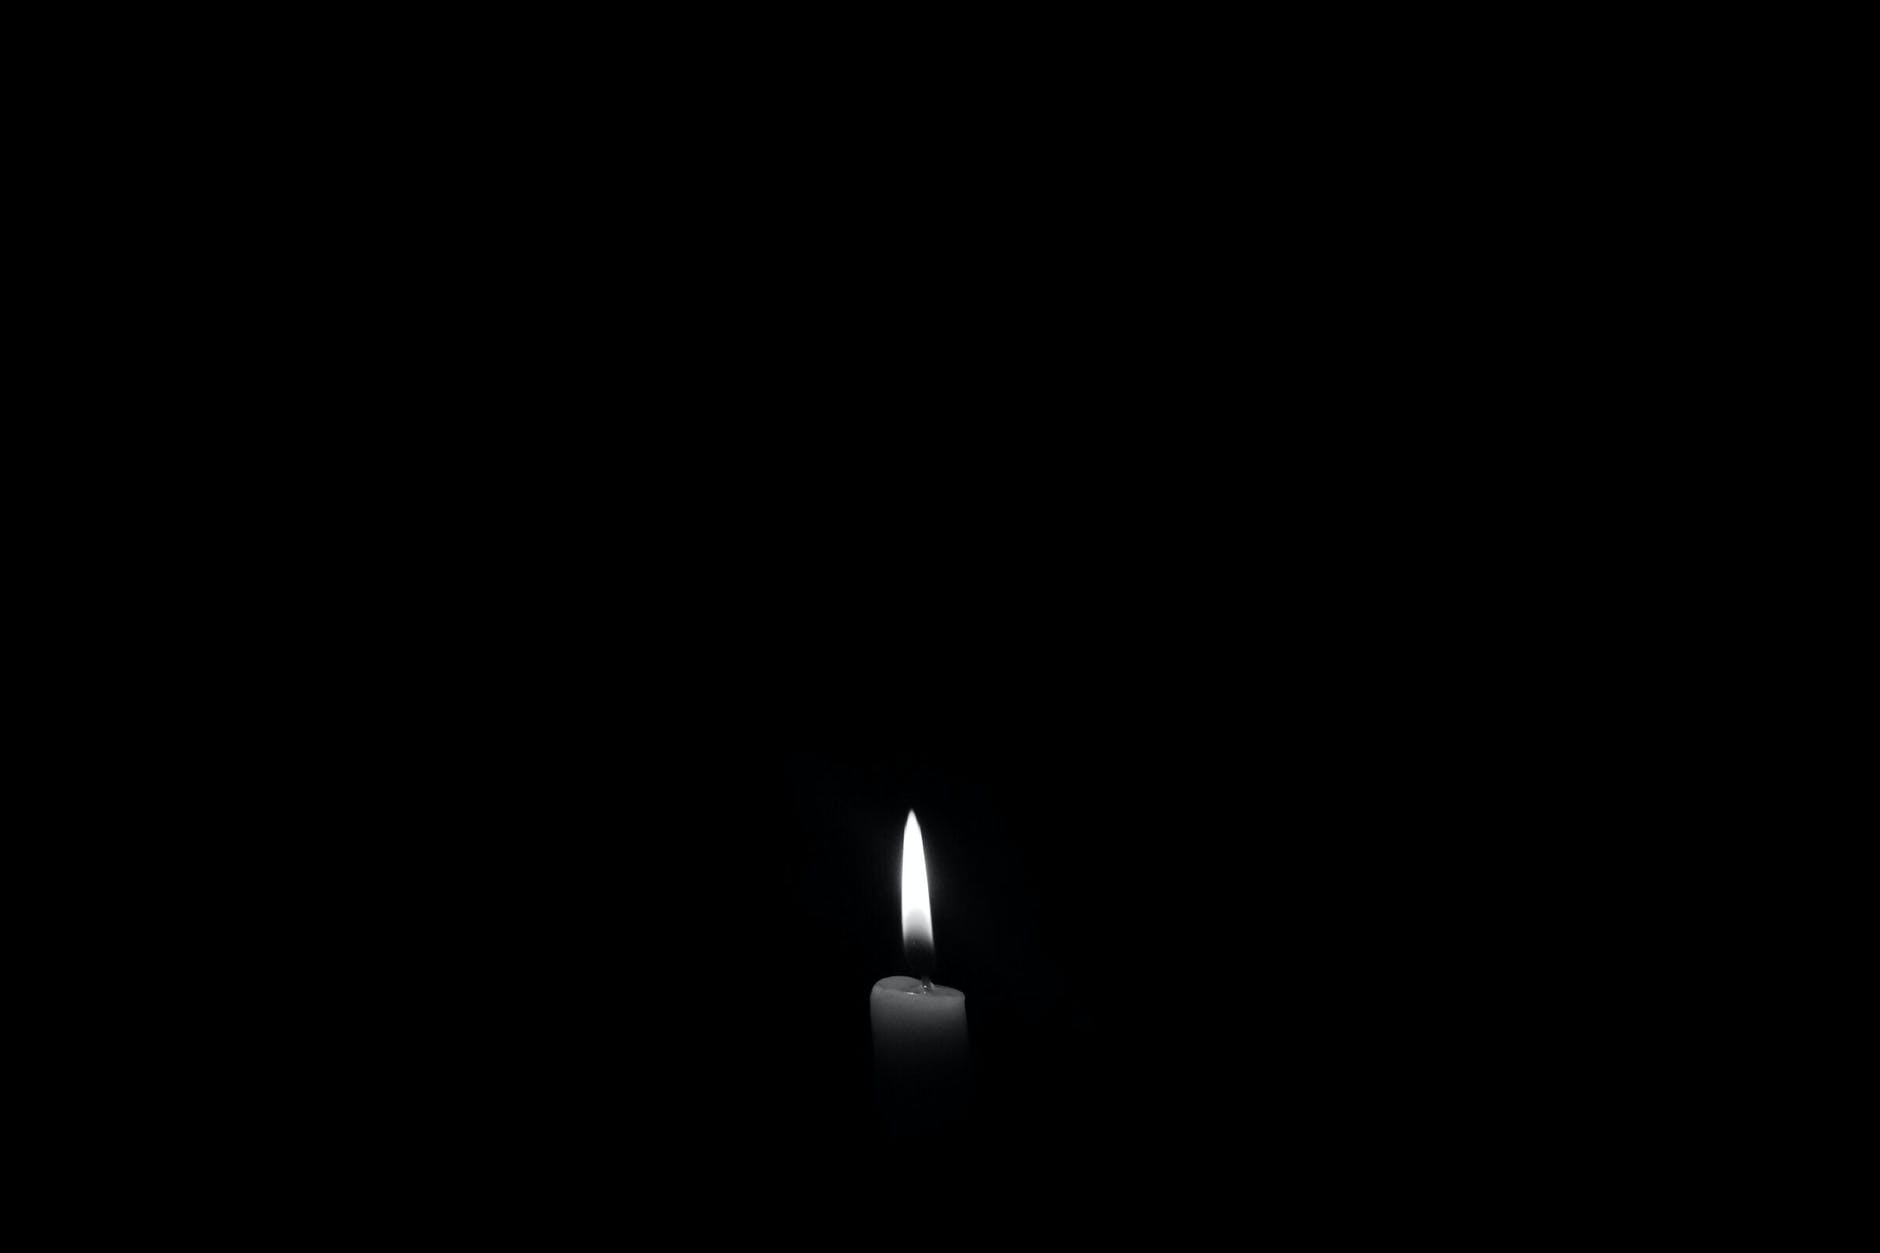 shadows of a candle